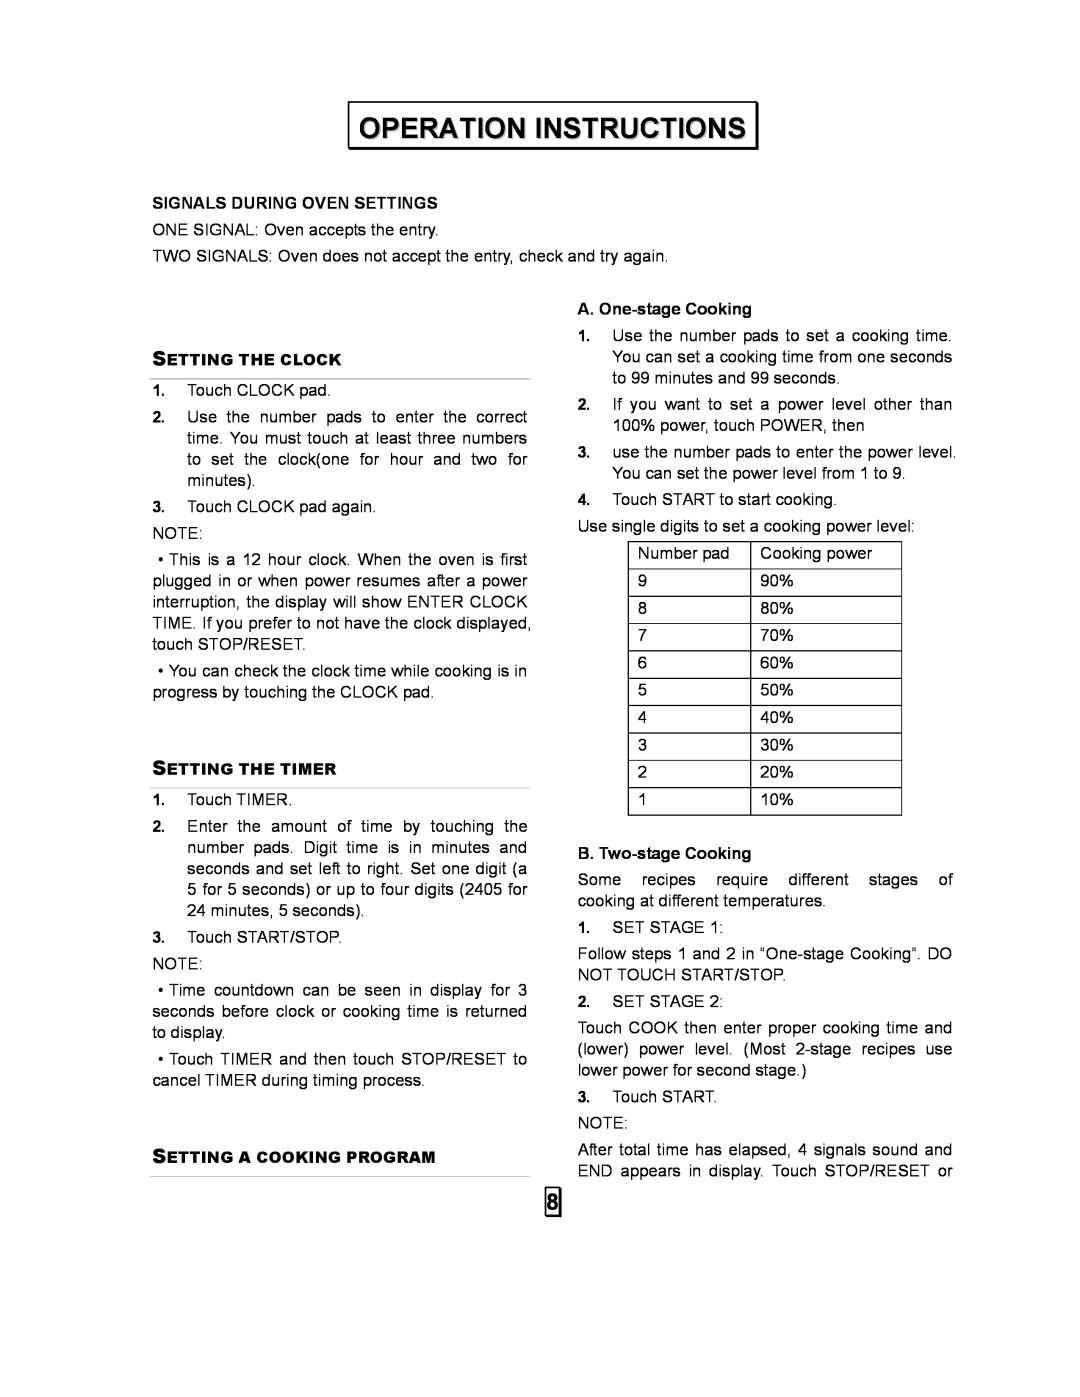 Galaxy Metal Gear 87040 Operation Instructions, Signals During Oven Settings, A. One-stageCooking, B. Two-stageCooking 